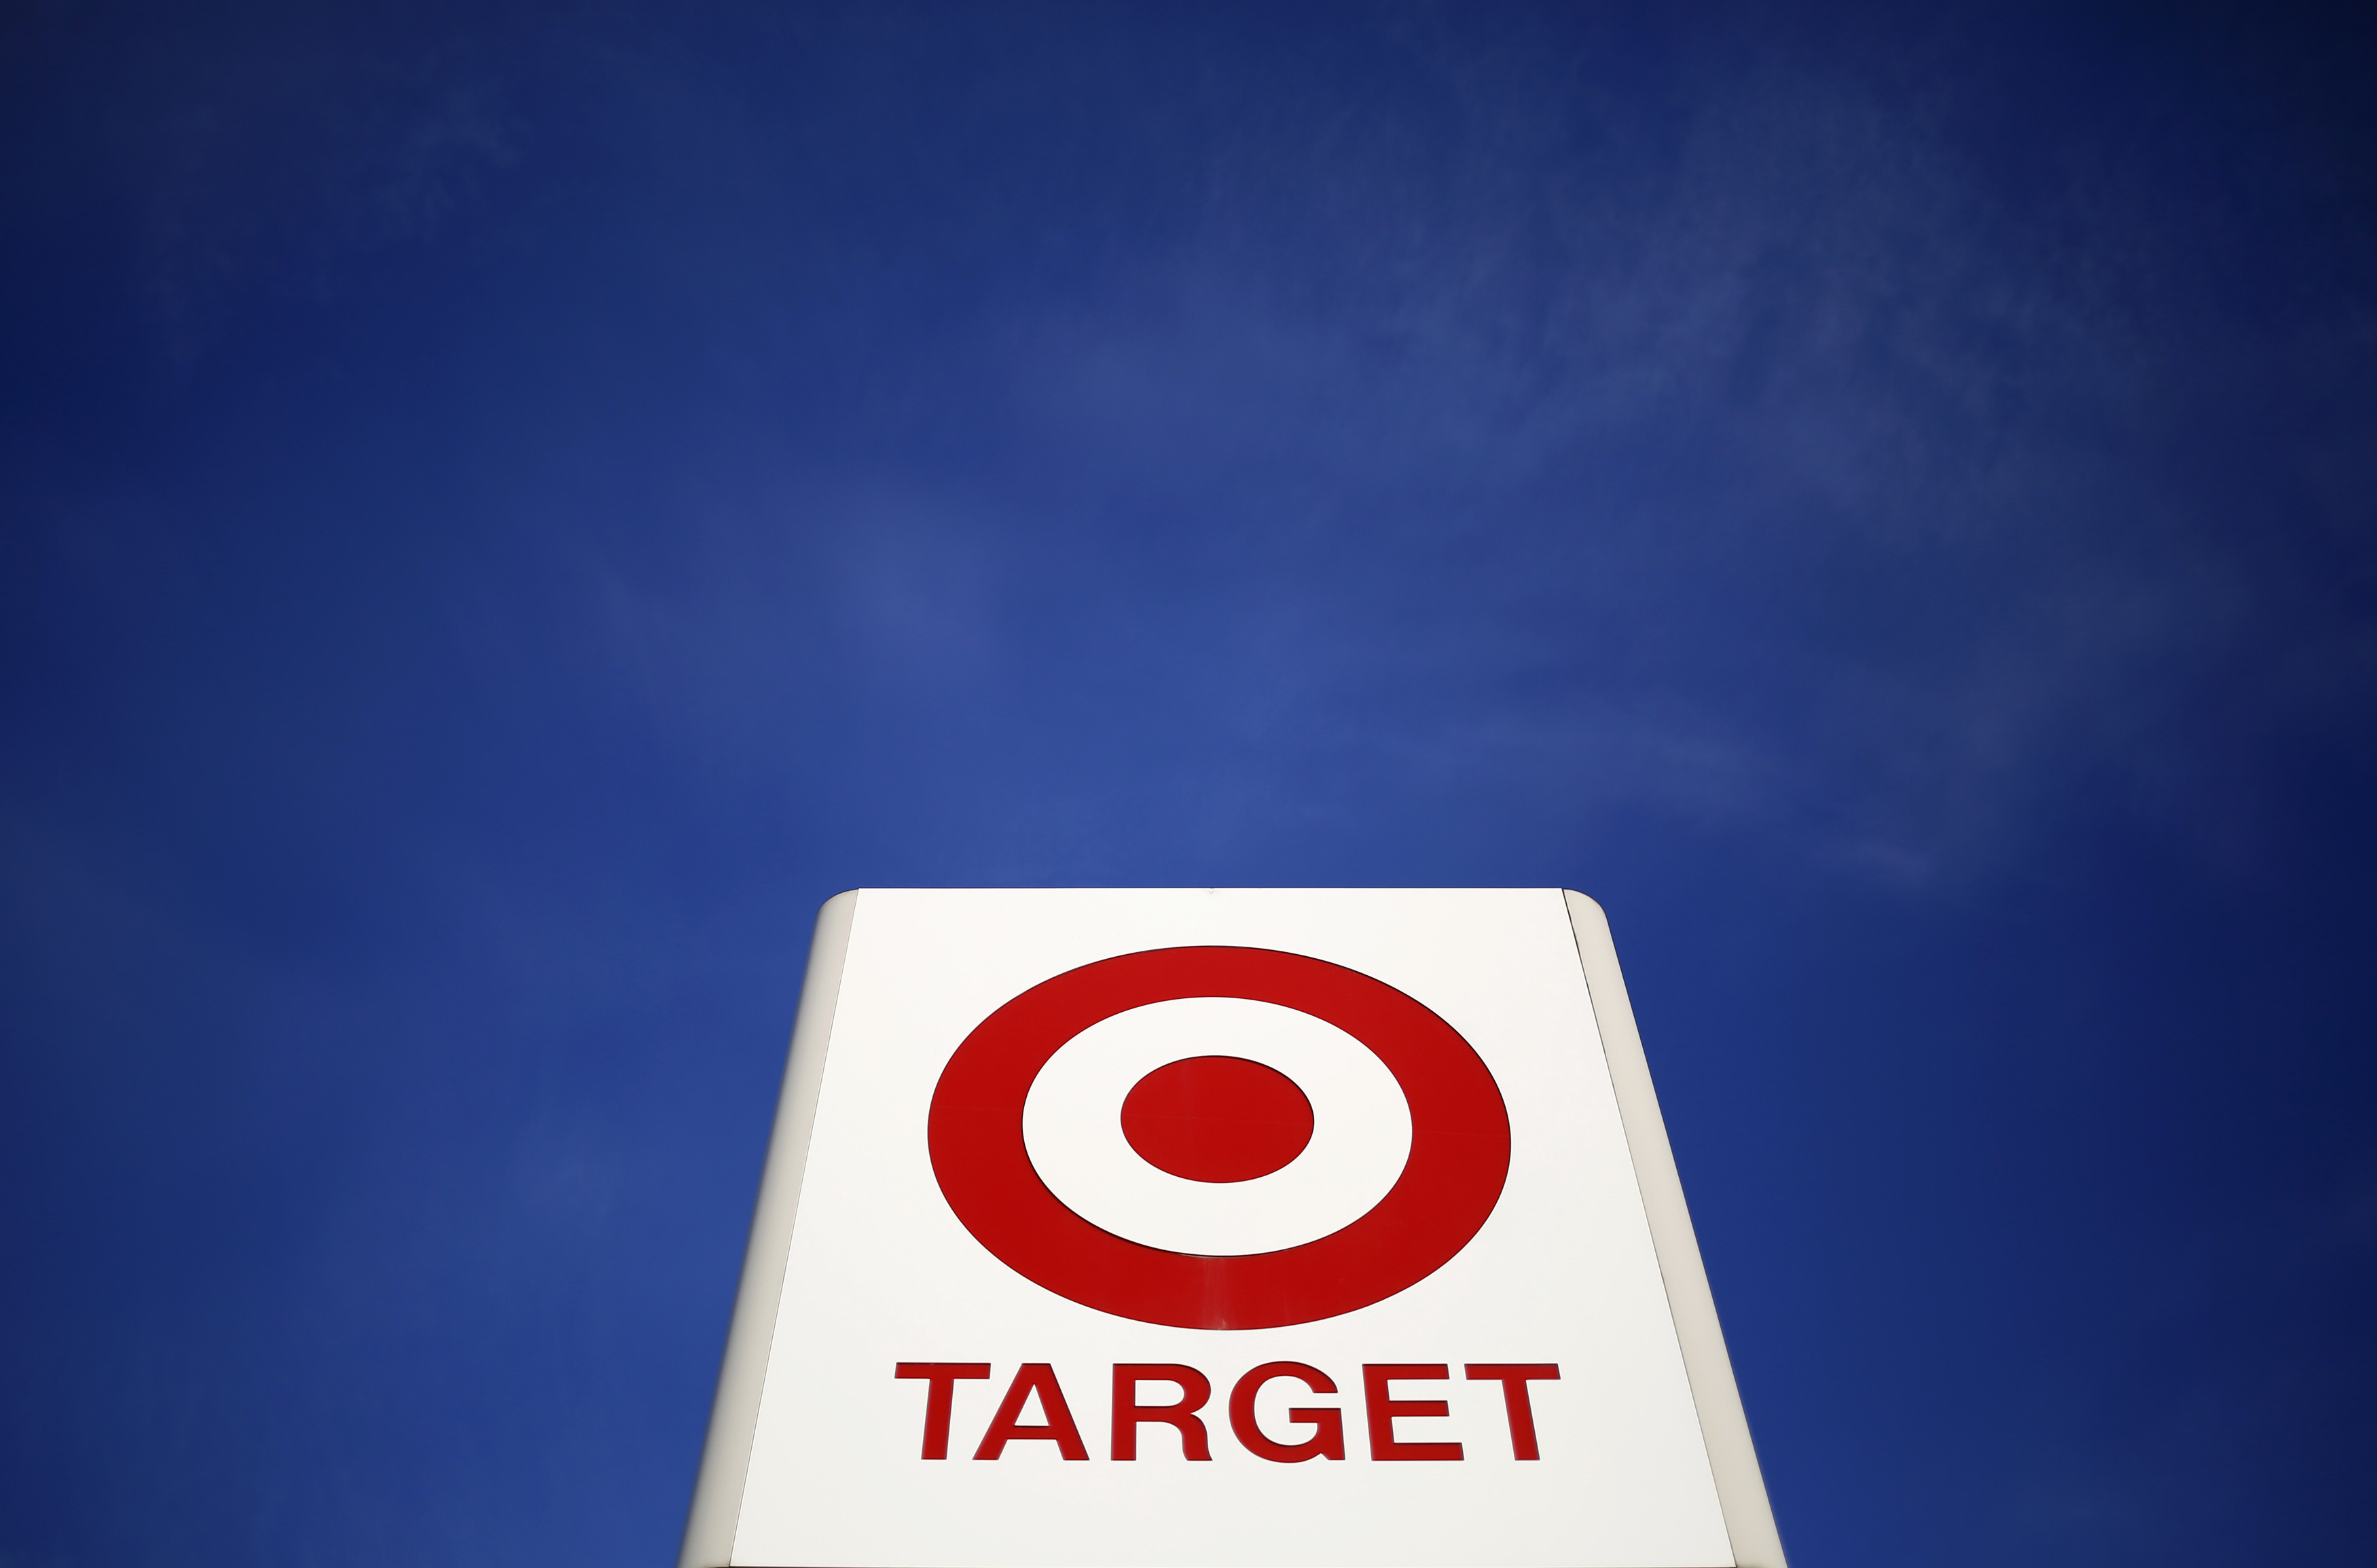 Target moves Pride collection to back of its only Mississippi